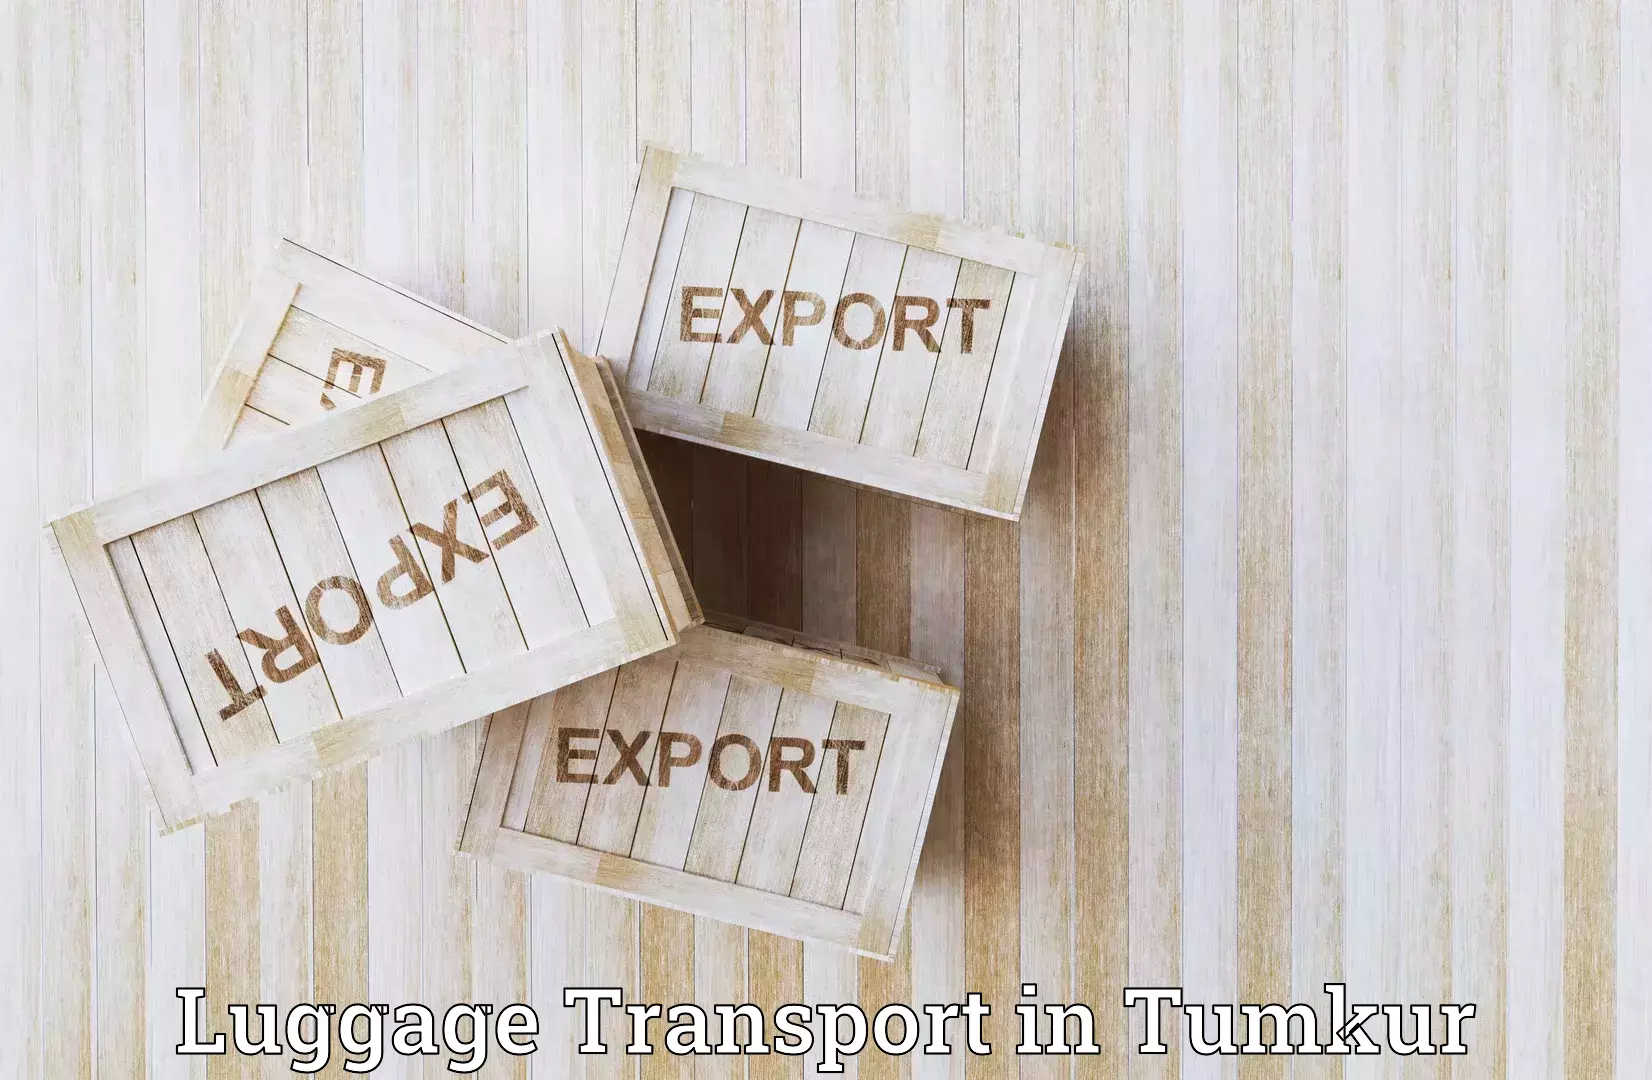 Luggage transport company in Tumkur